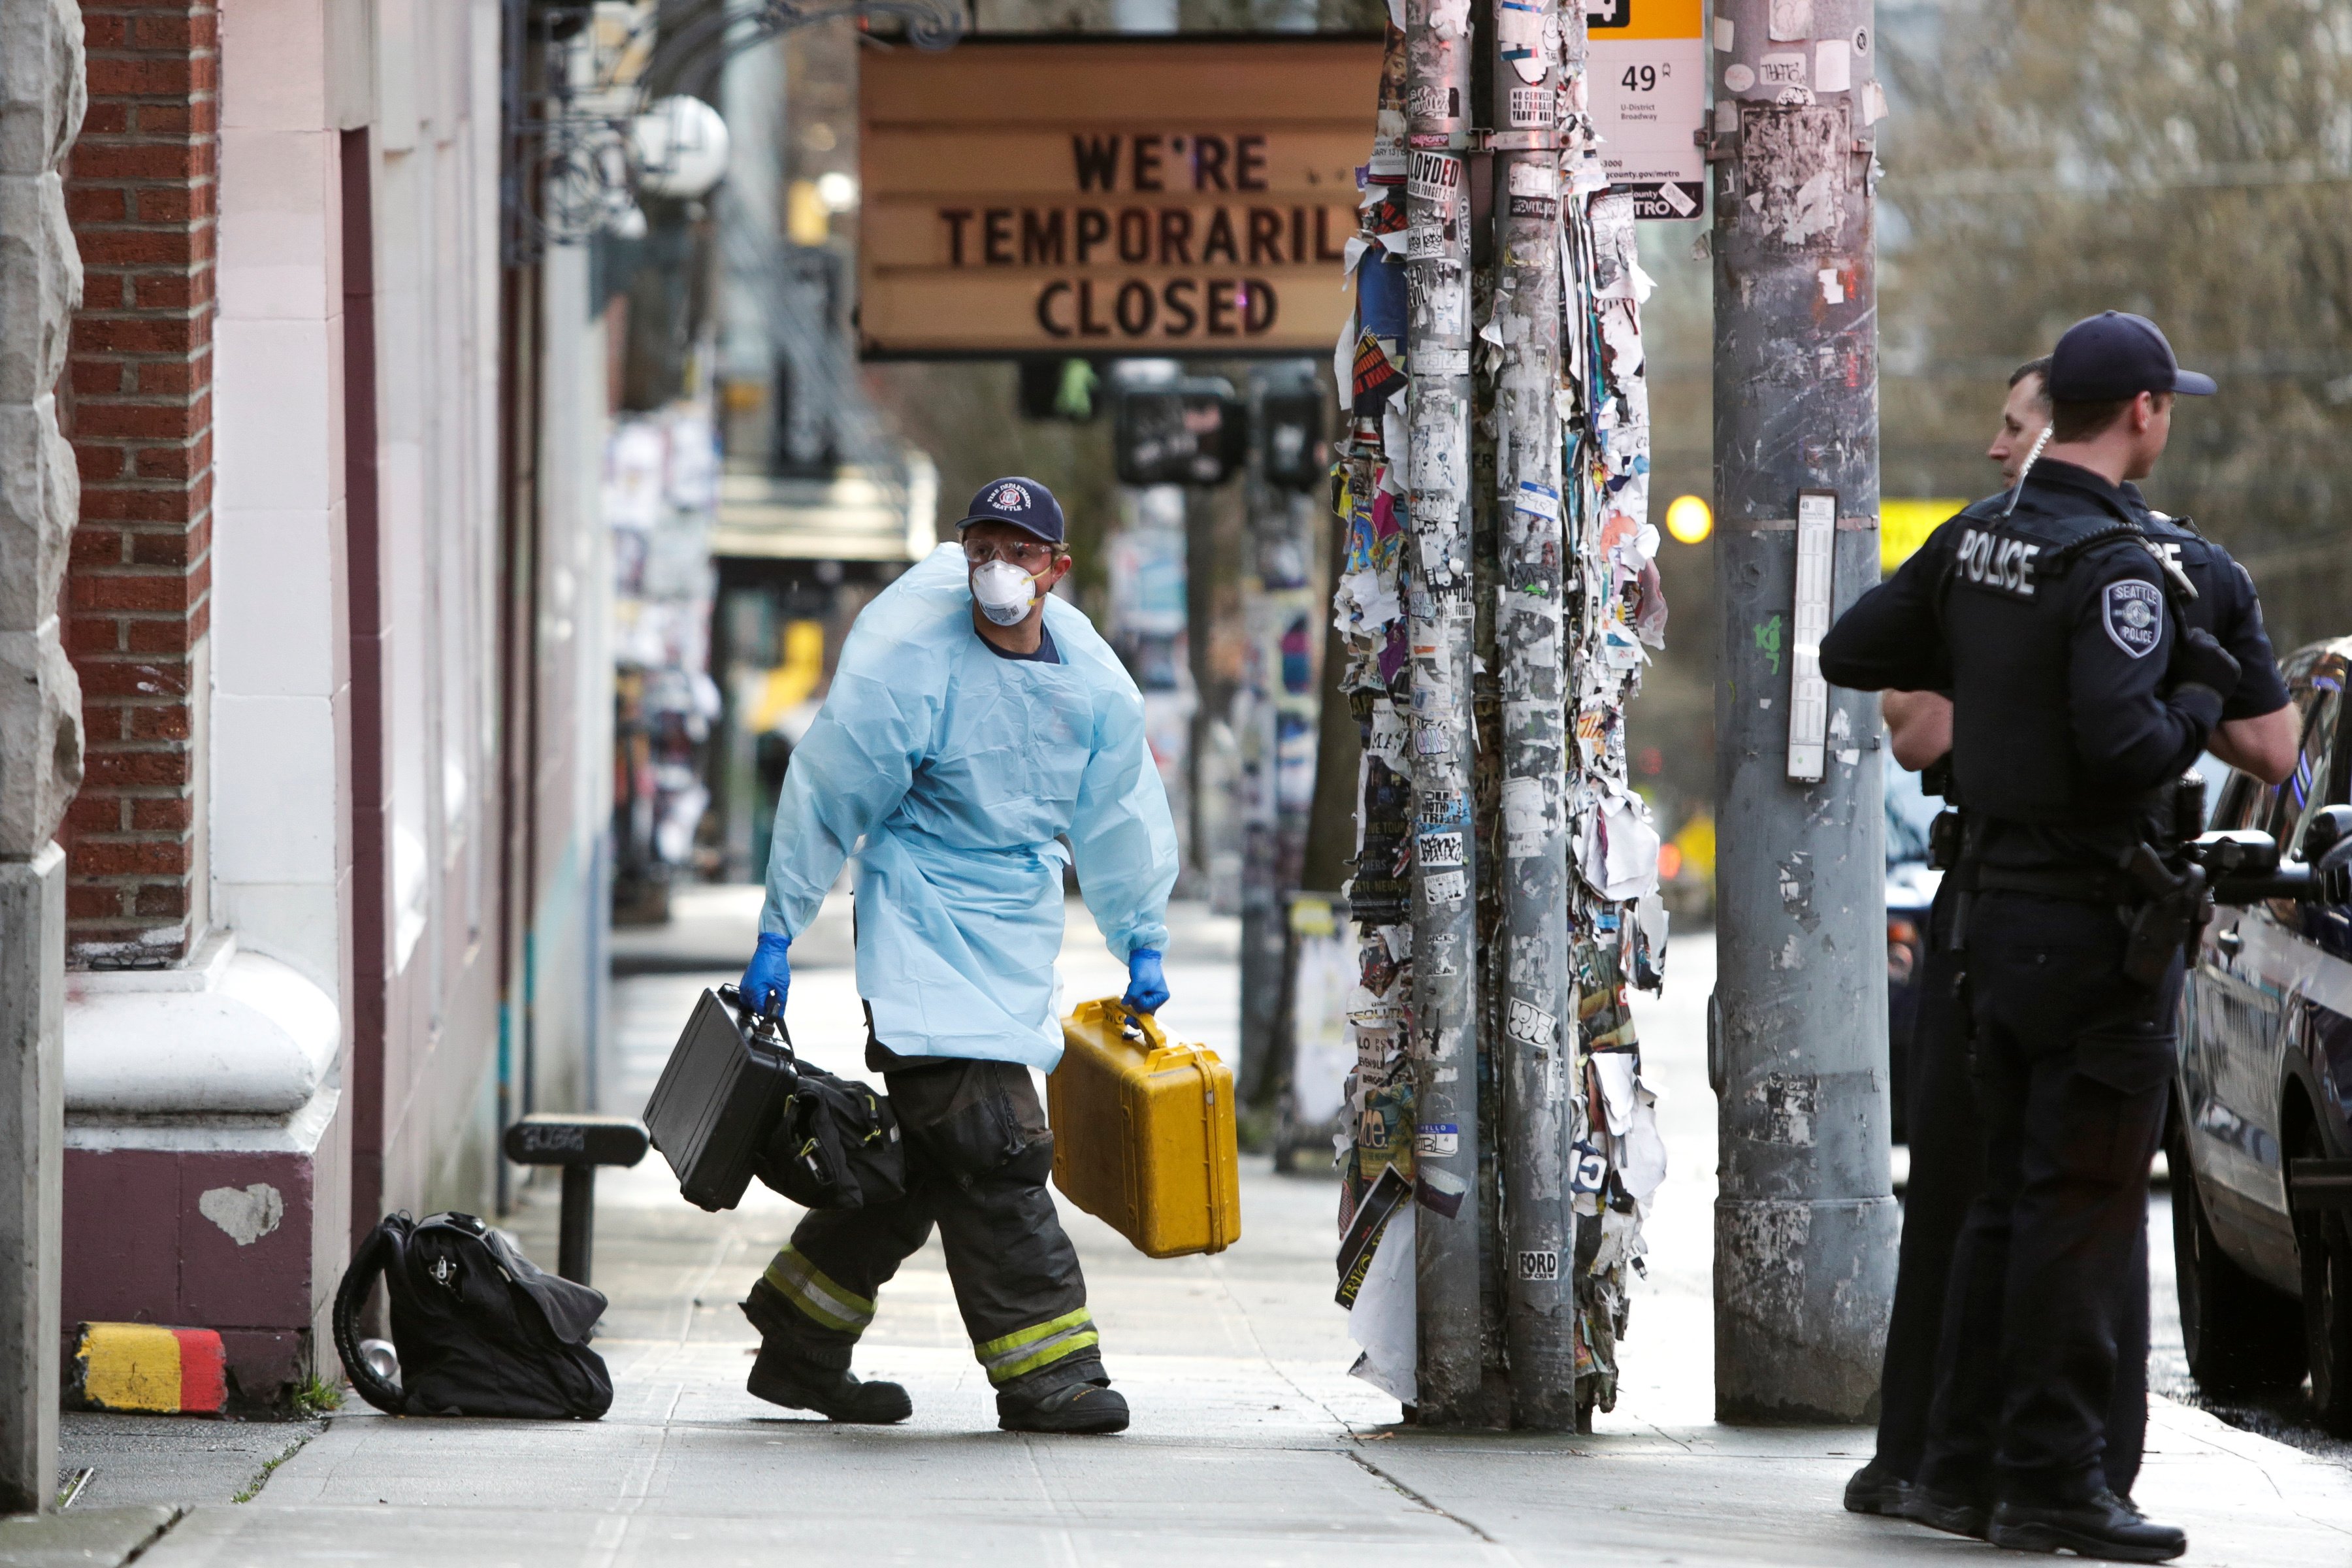 A member of the Seattle Fire Department wears personal protective equipment (PPE) following a medical response as efforts continue to help slow the spread of coronavirus disease (COVID-19) in Seattle, Washington, U.S. March 31, 2020. REUTERS/Jason Redmond 